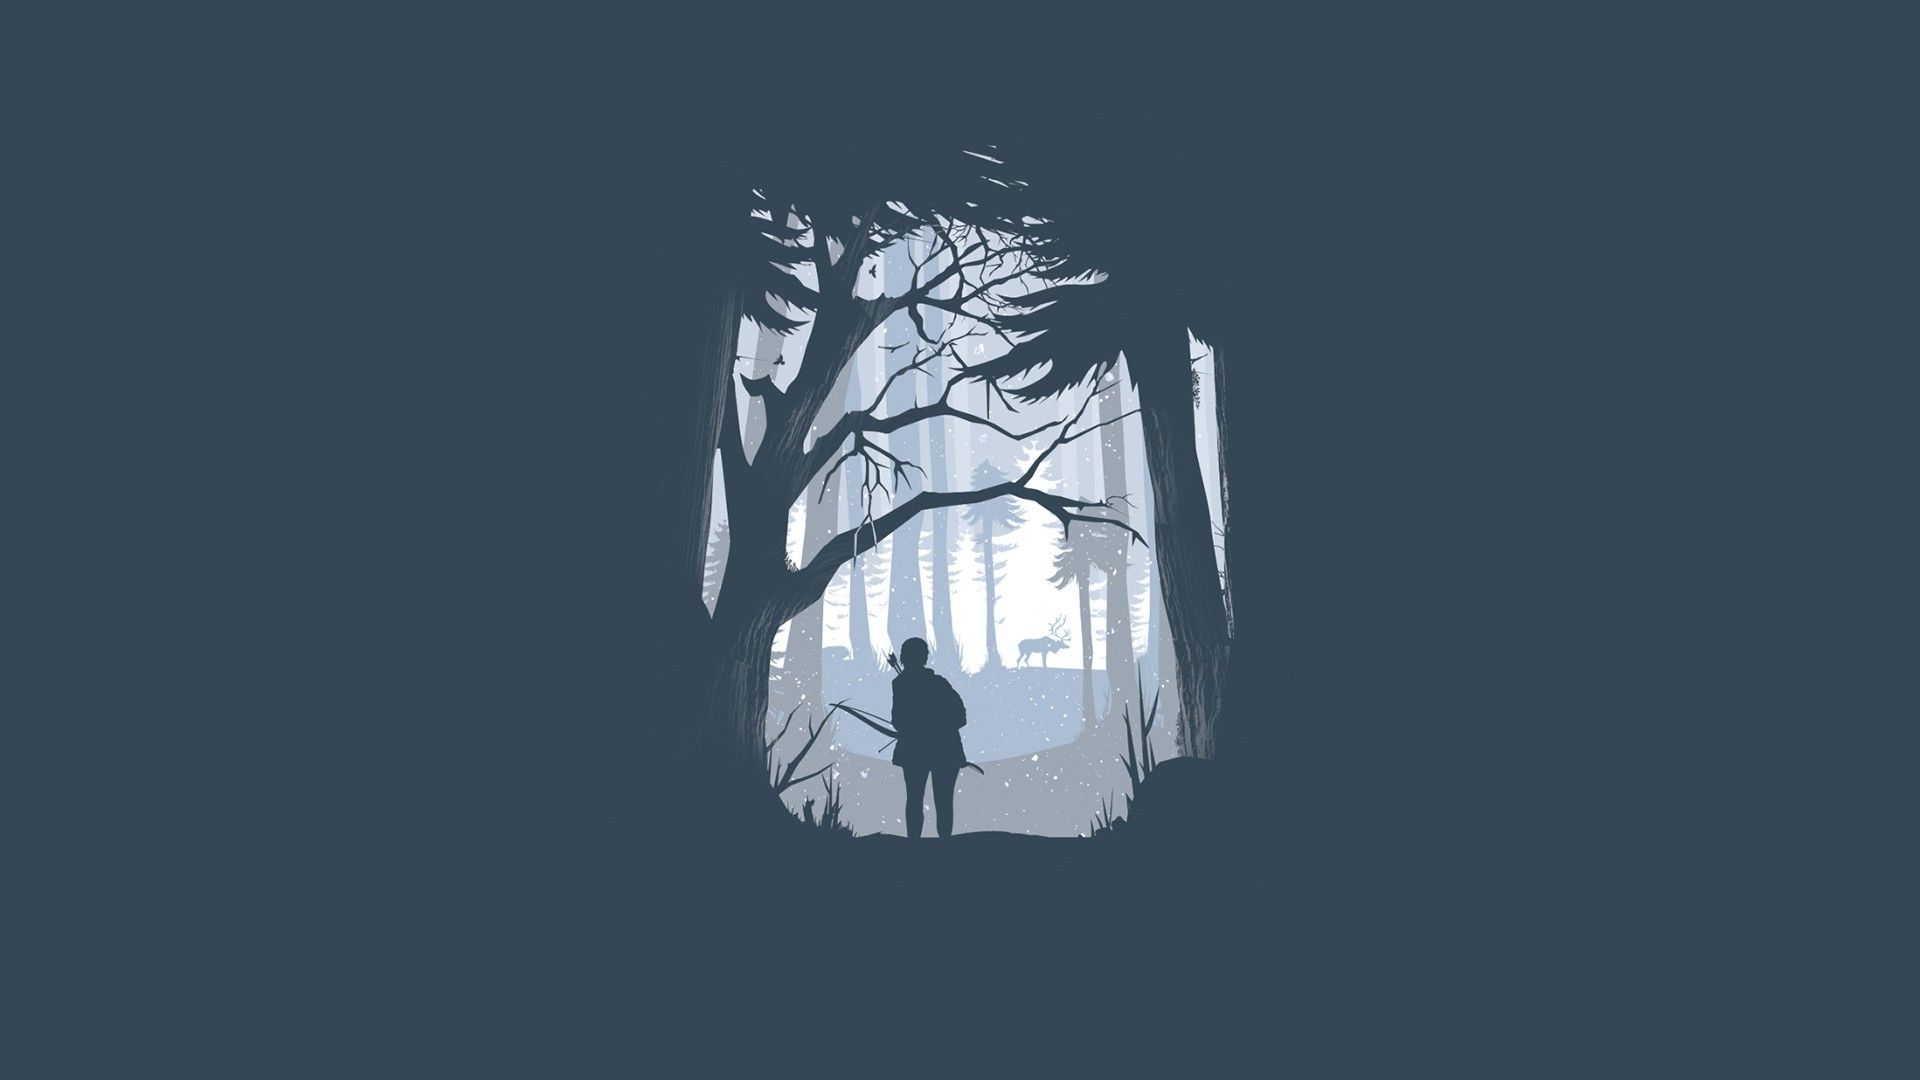 Wallpaper, forest, illustration, minimalism, winter, blue, wind, The Last of Us, hunting, light, darkness, screenshot, 1920x1080 px, computer wallpaper, black and white, monochrome photography, font 1920x1080